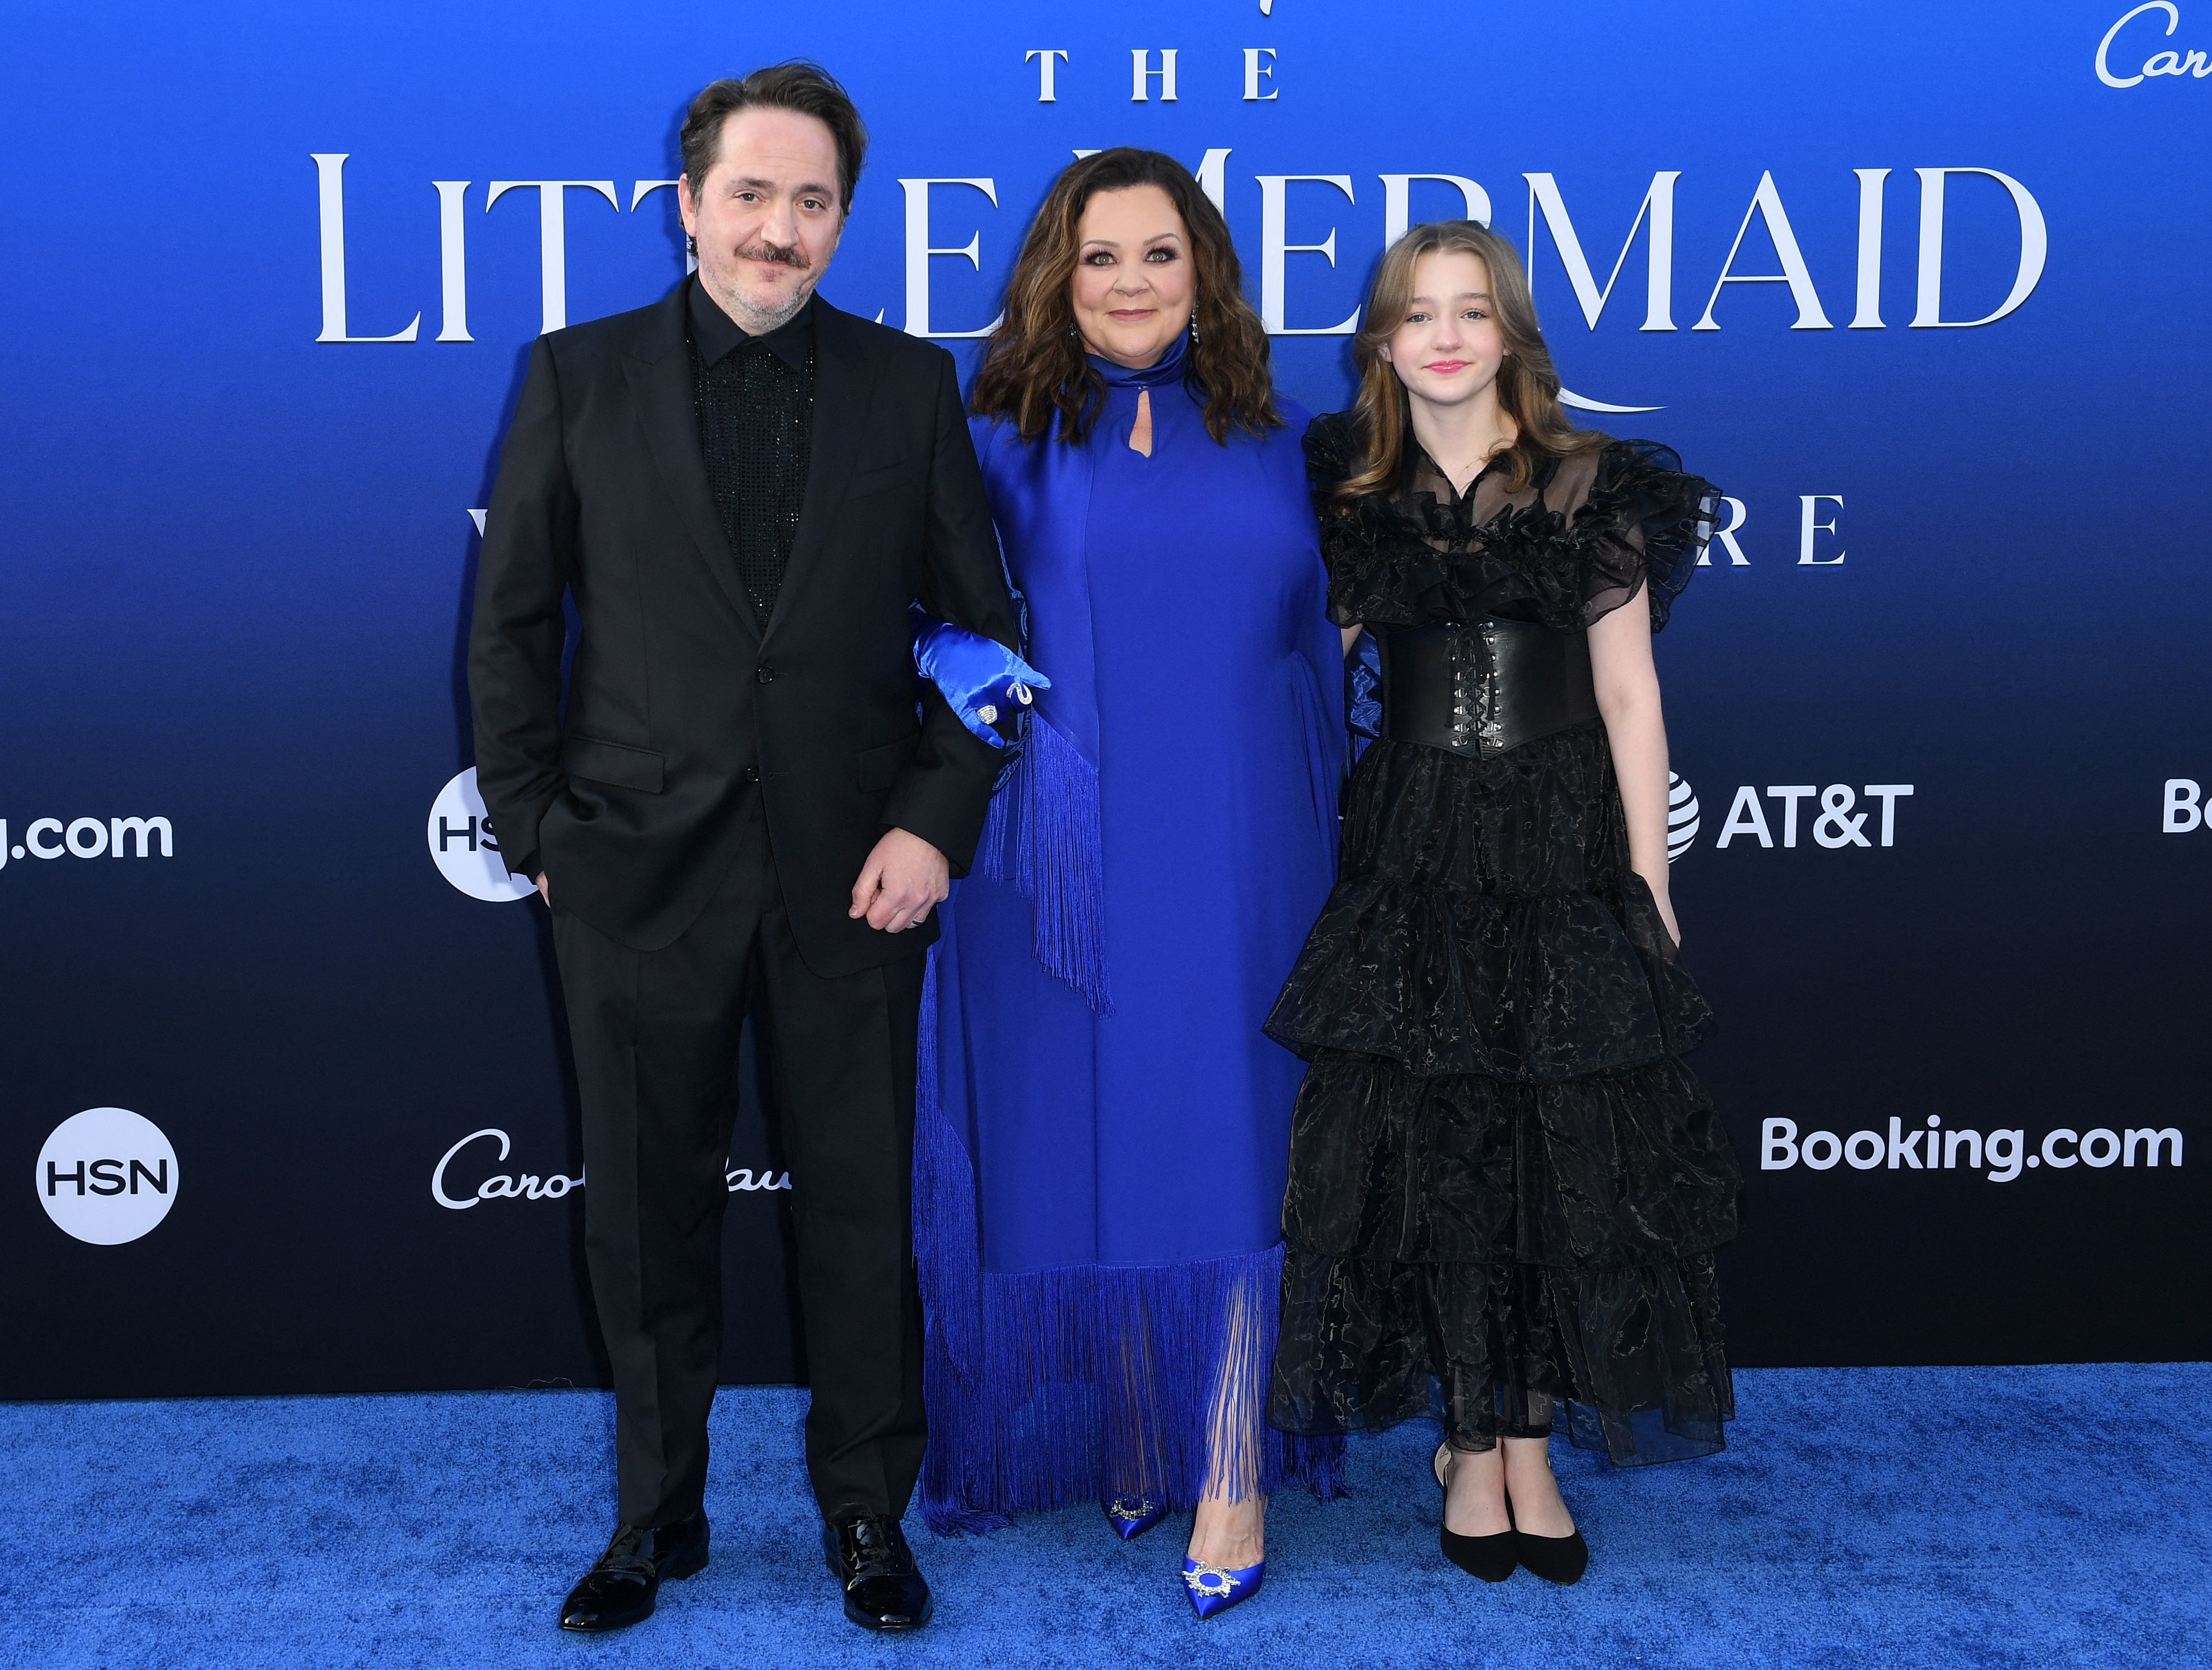 Ben Falcone, Melissa McCarthy and Vivian Falcone at the premiere of "The Little Mermaid" in Hollywood, California on May 8, 2023 | Source: Getty Images